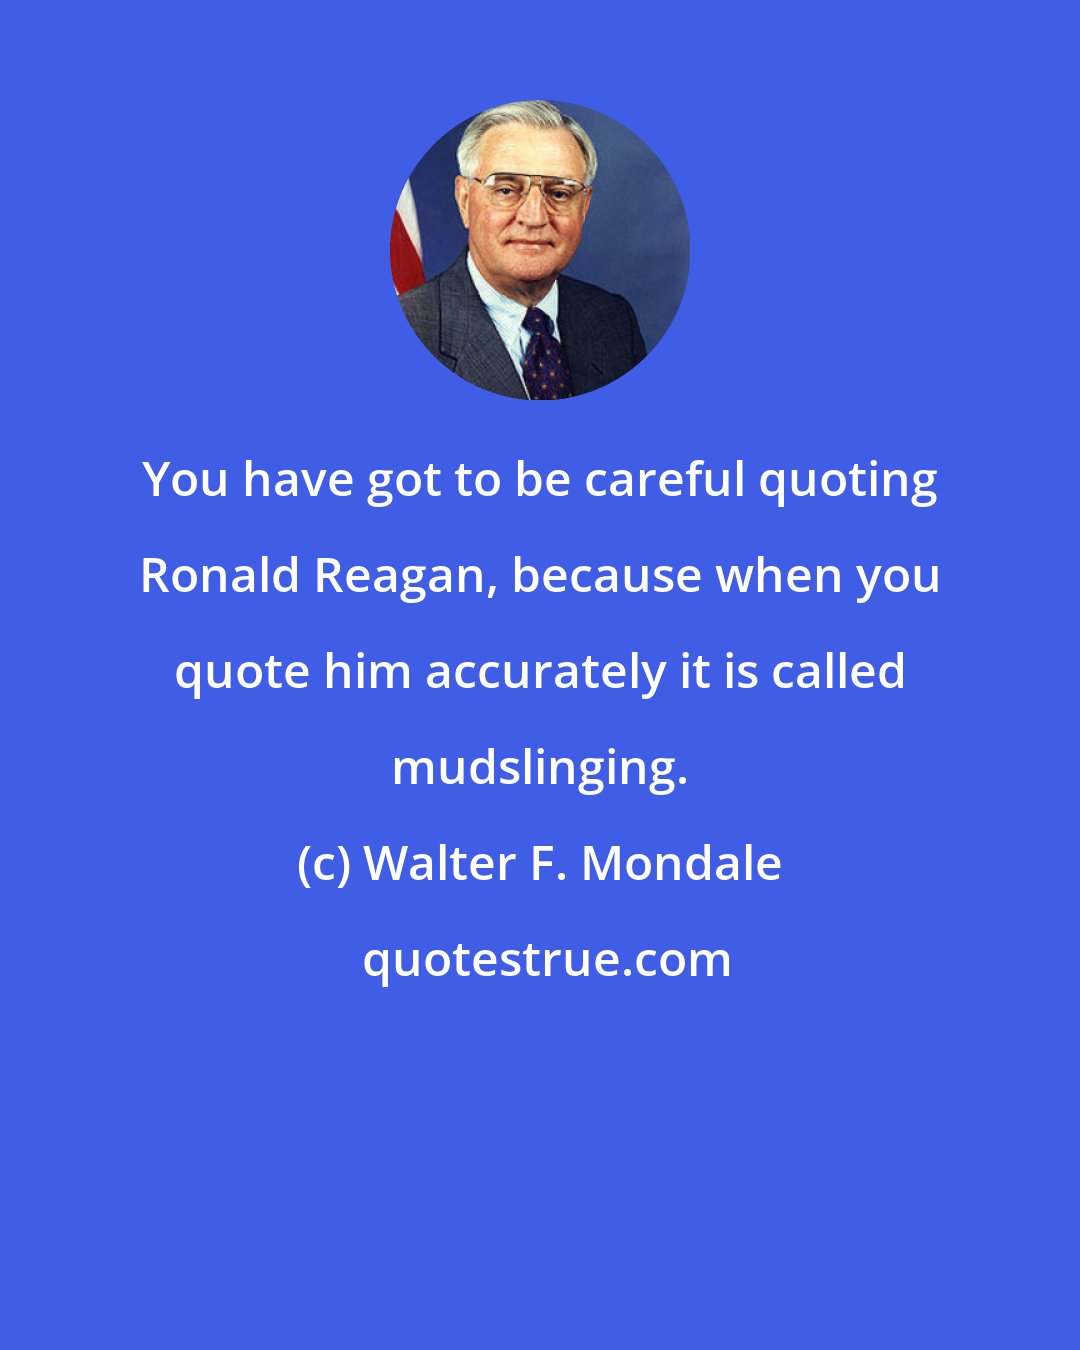 Walter F. Mondale: You have got to be careful quoting Ronald Reagan, because when you quote him accurately it is called mudslinging.